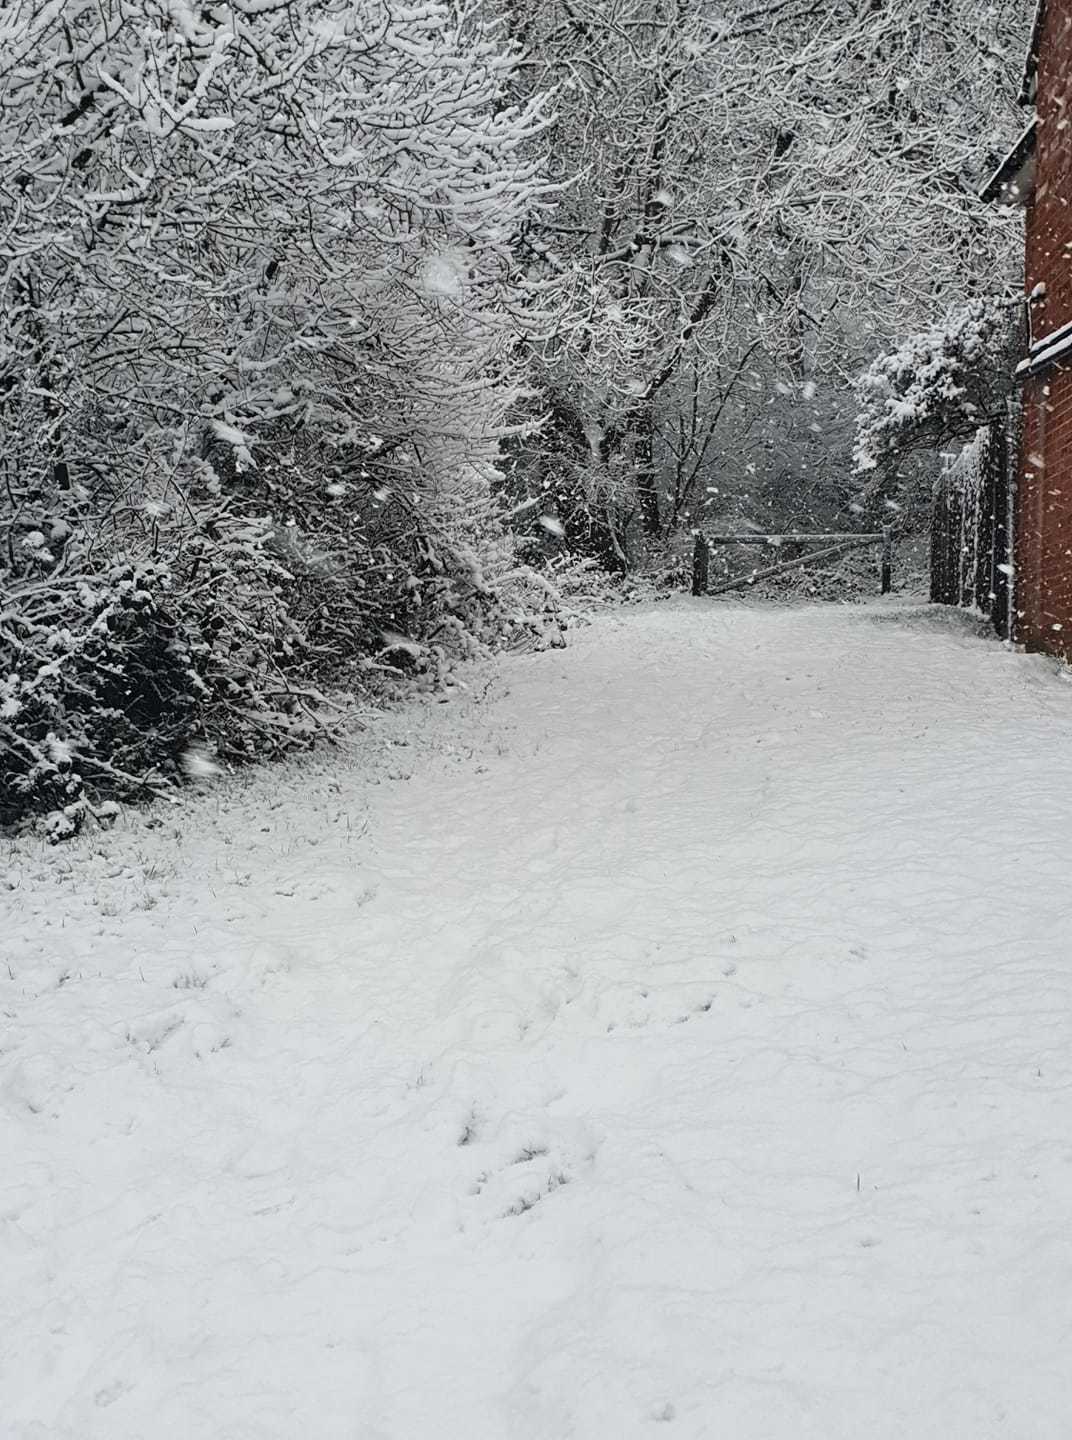 Rhonnie Mann says the Oxhey Woods entrance was covered in snow